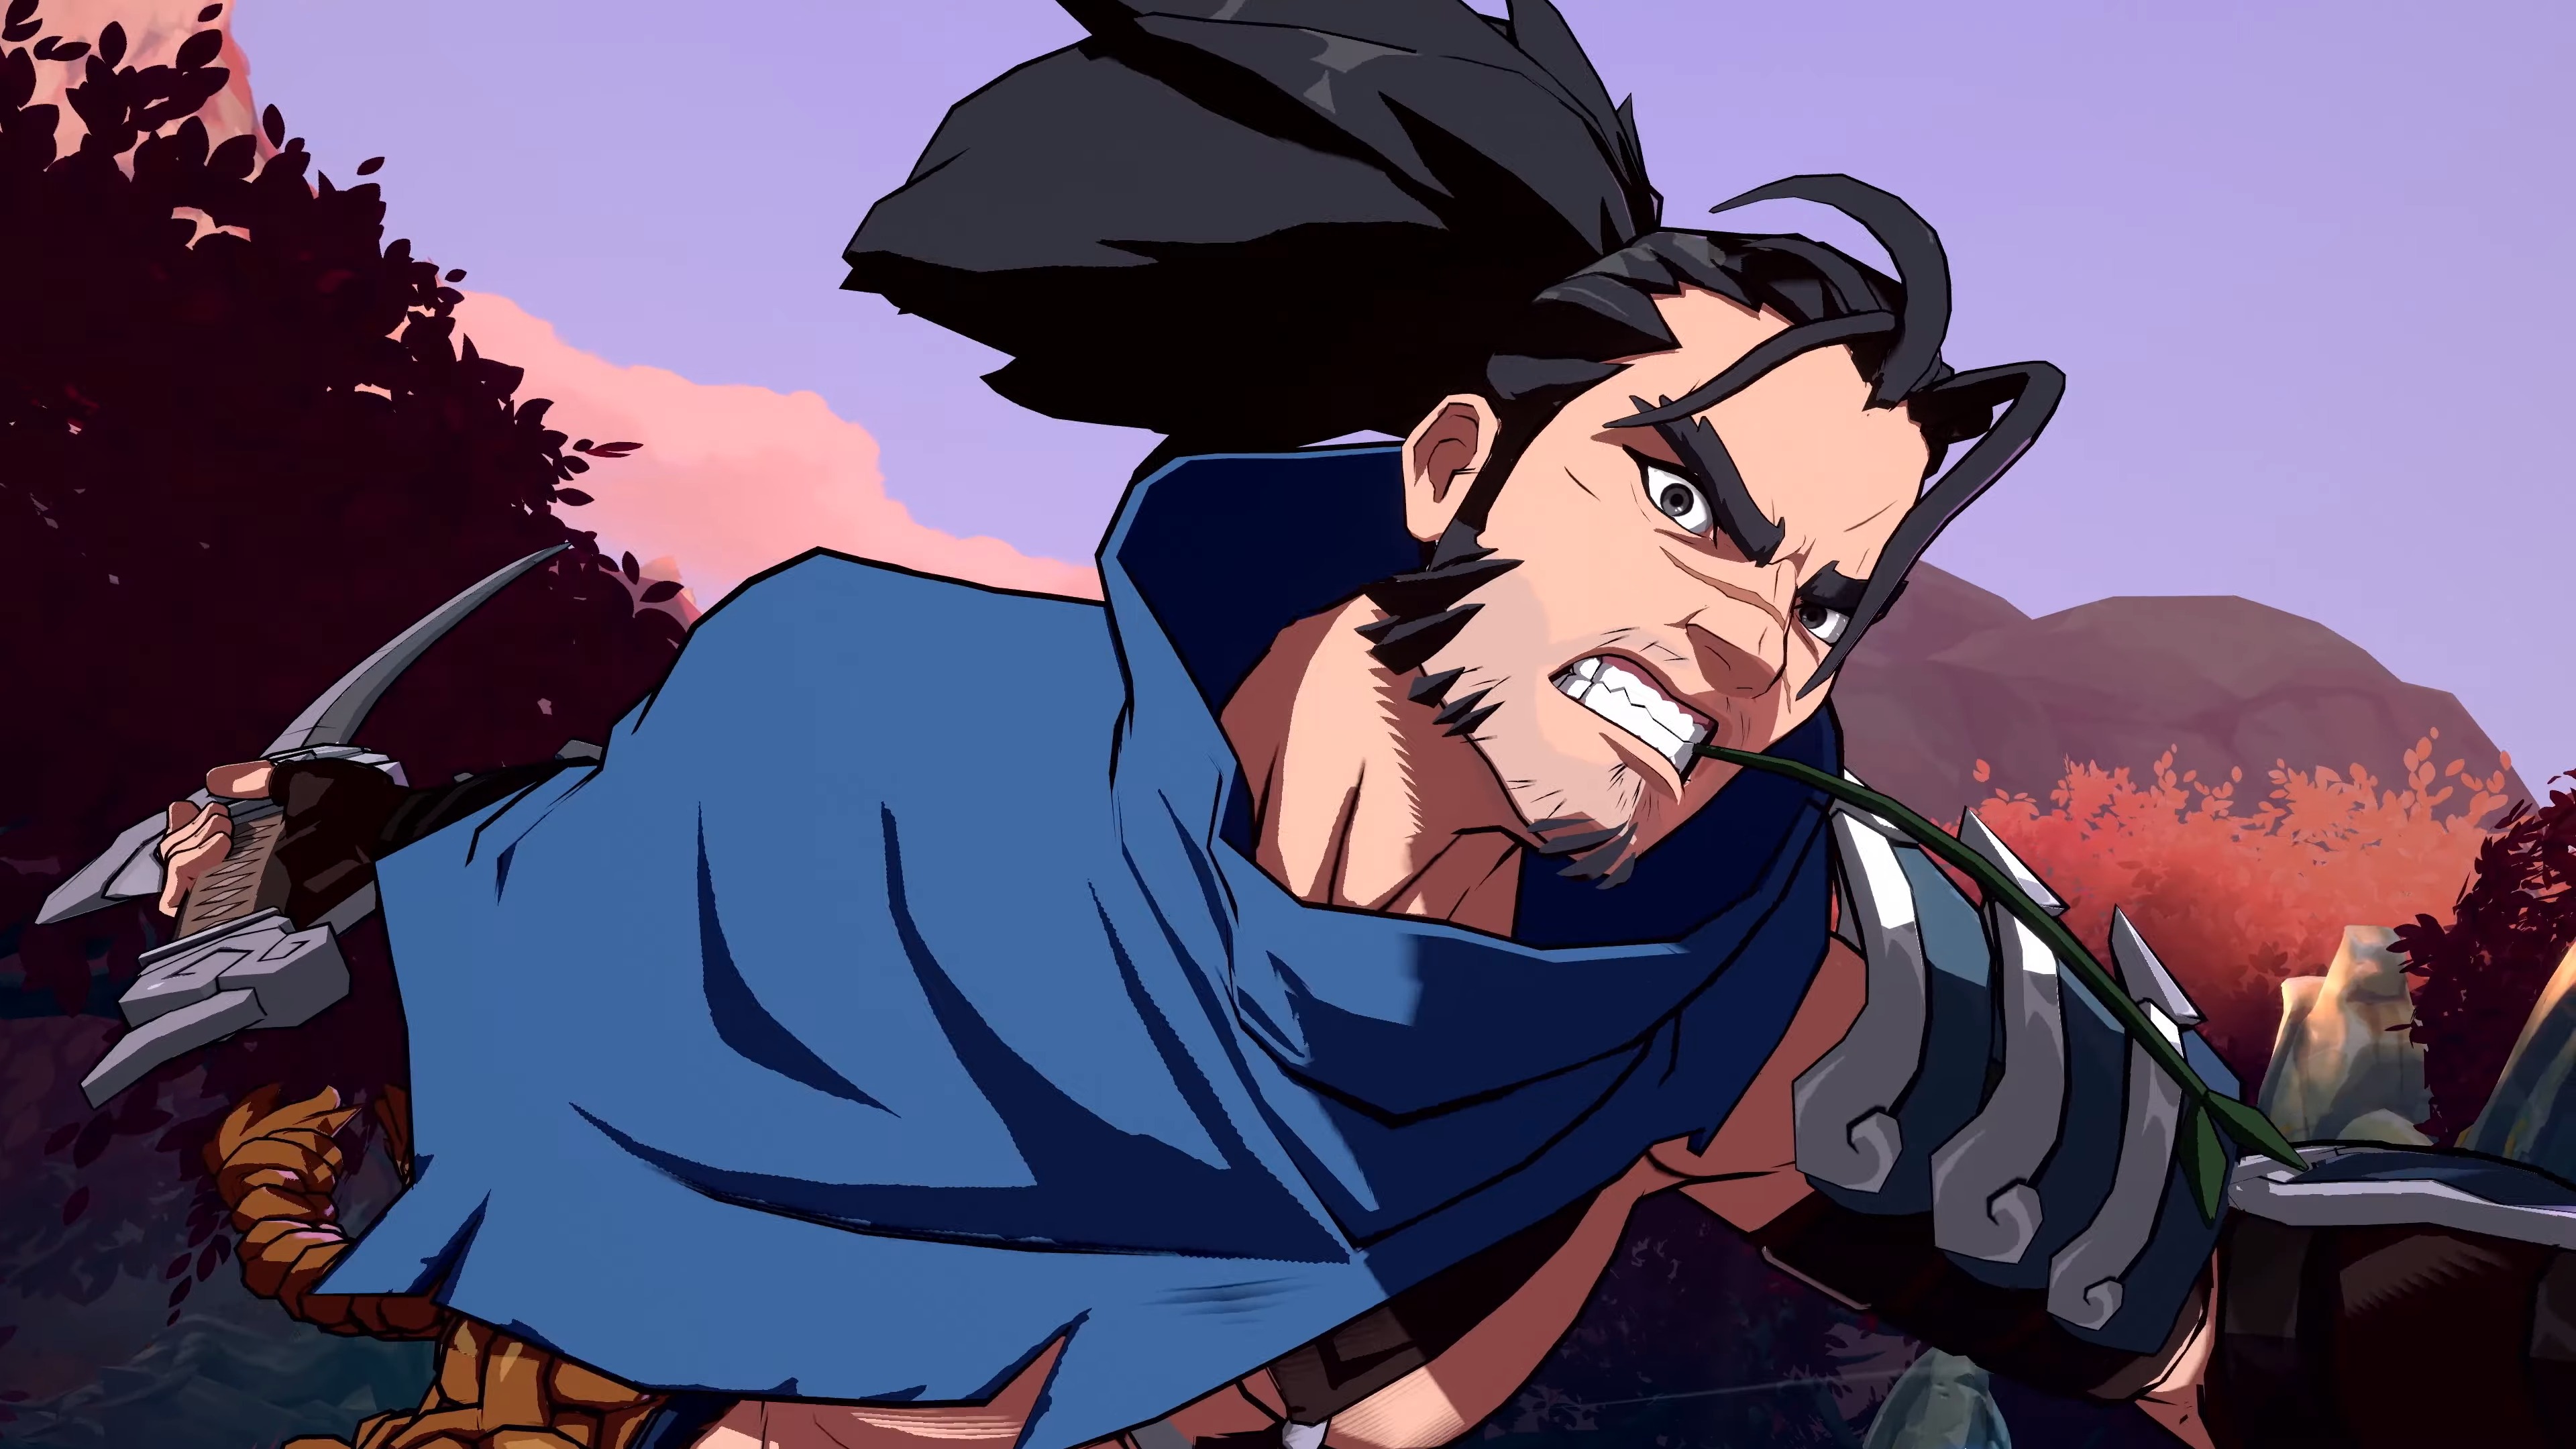 A close-up shot of Yasuo swinging his katana in a still from Project L